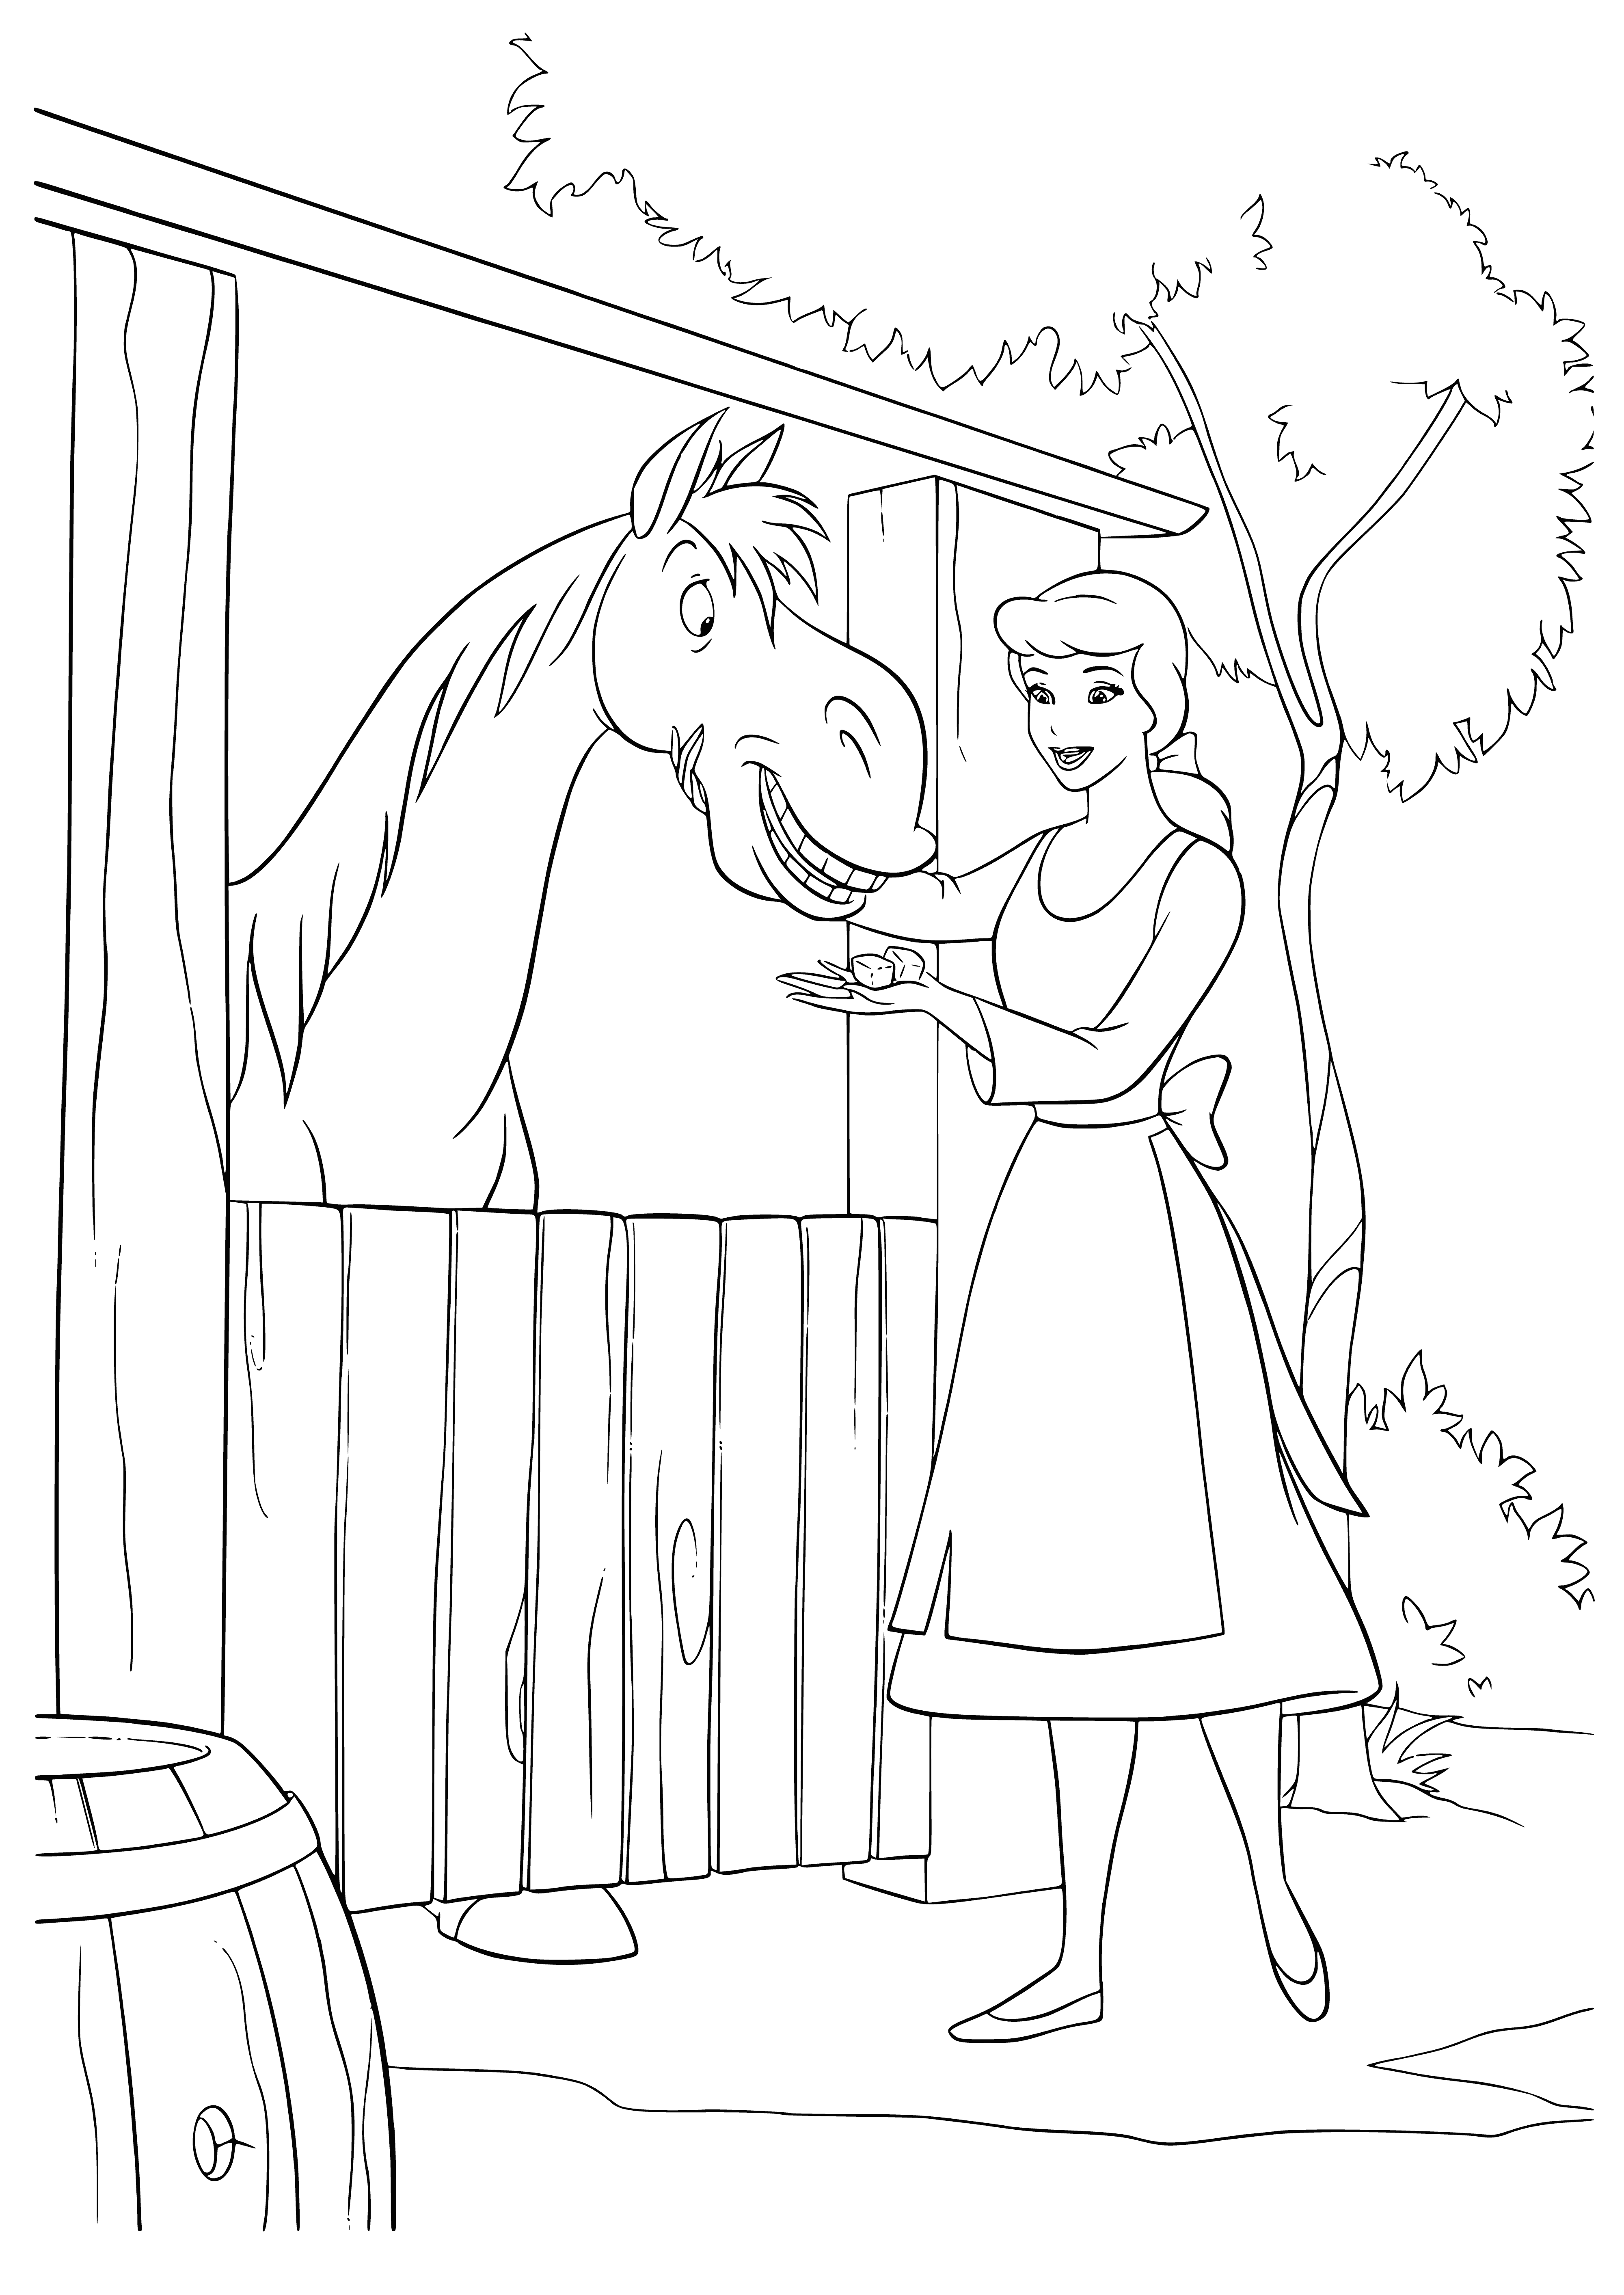 Cinderella feeds the horse coloring page